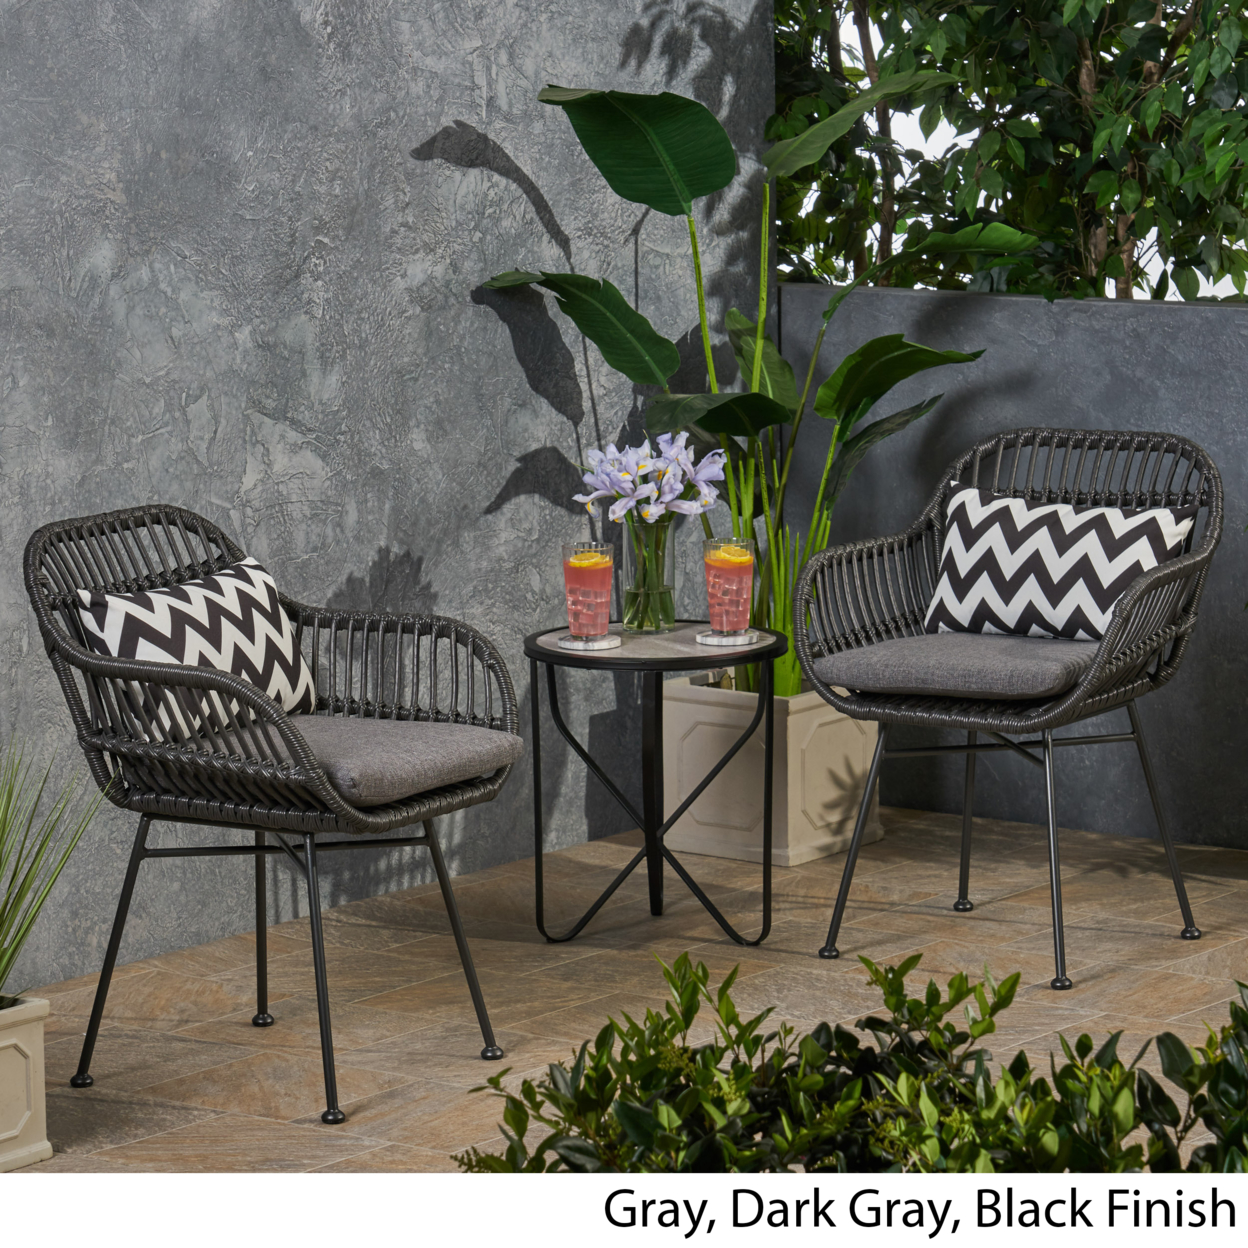 Rodney Outdoor Woven Faux Rattan Chairs With Cushions (Set Of 2) - Gray + Dark Gray + Black Finish